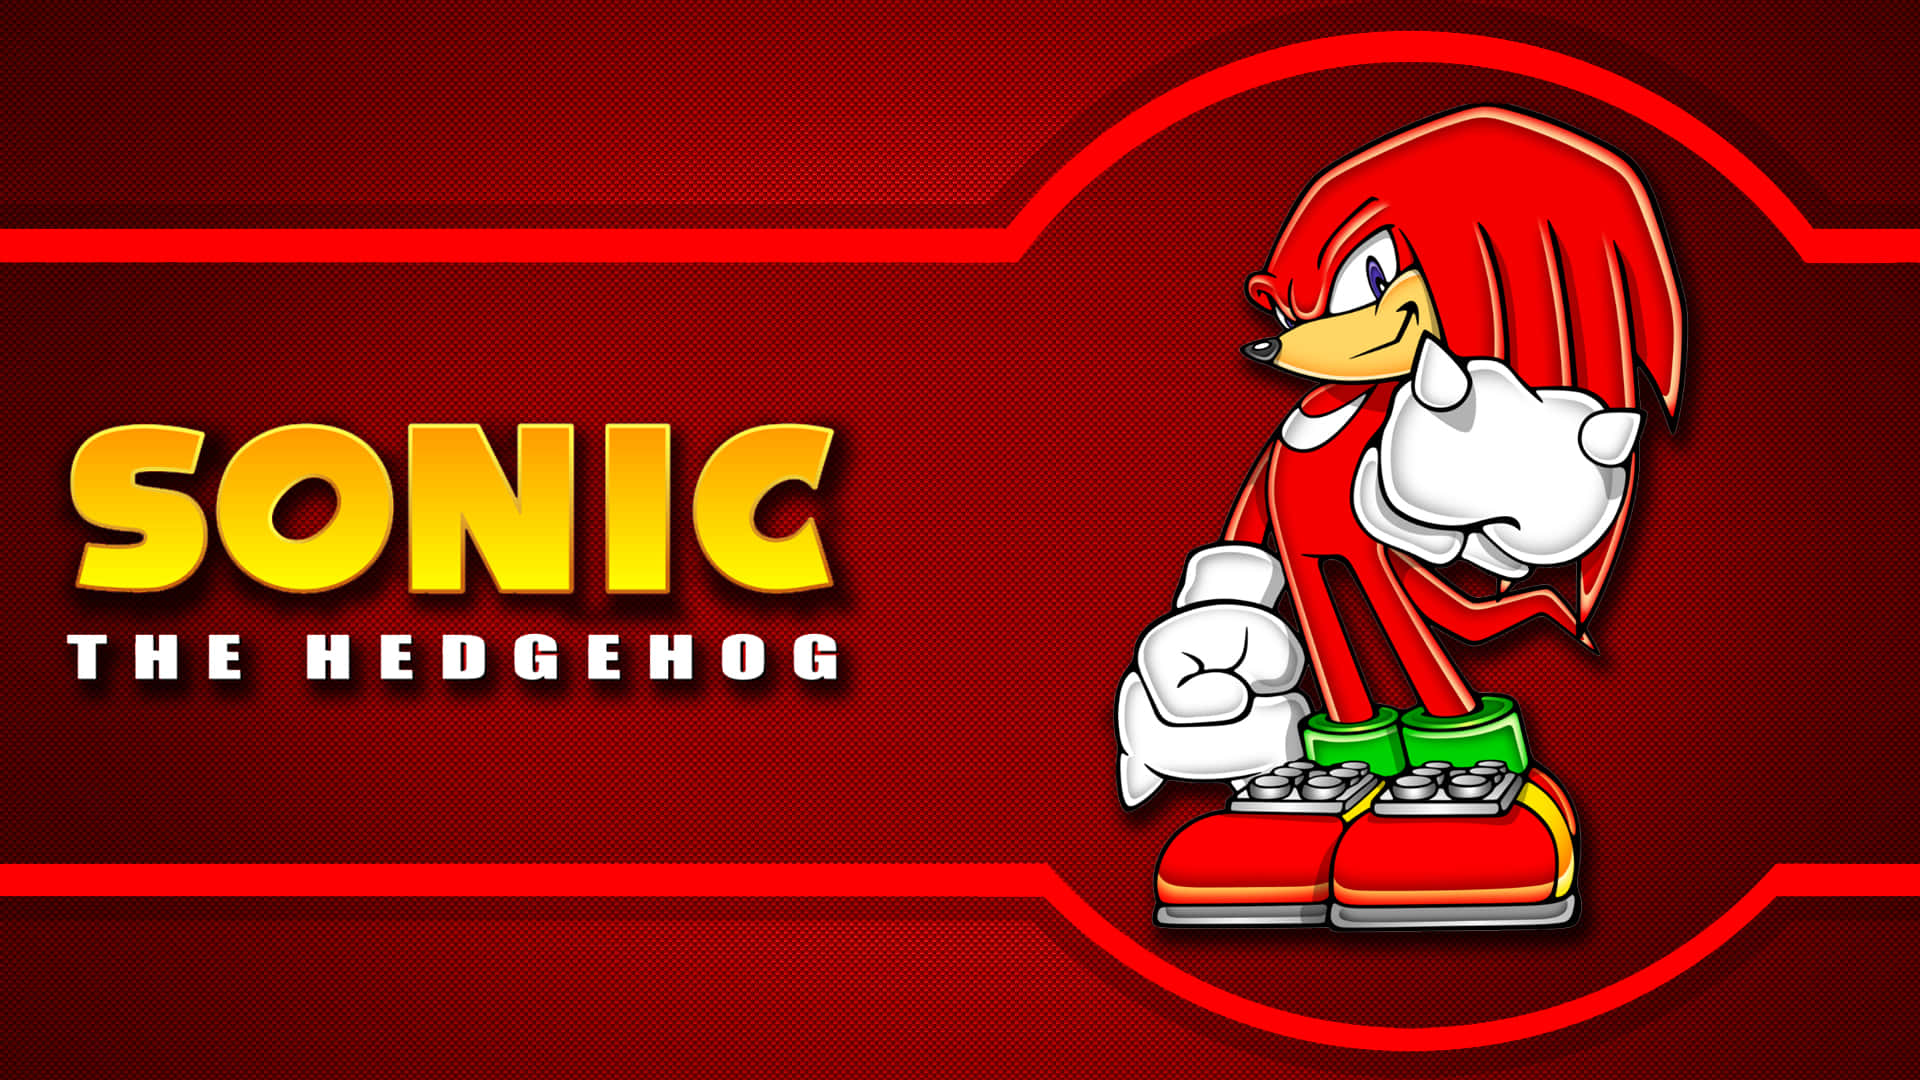 Knuckles, The Echidna Ready For Action